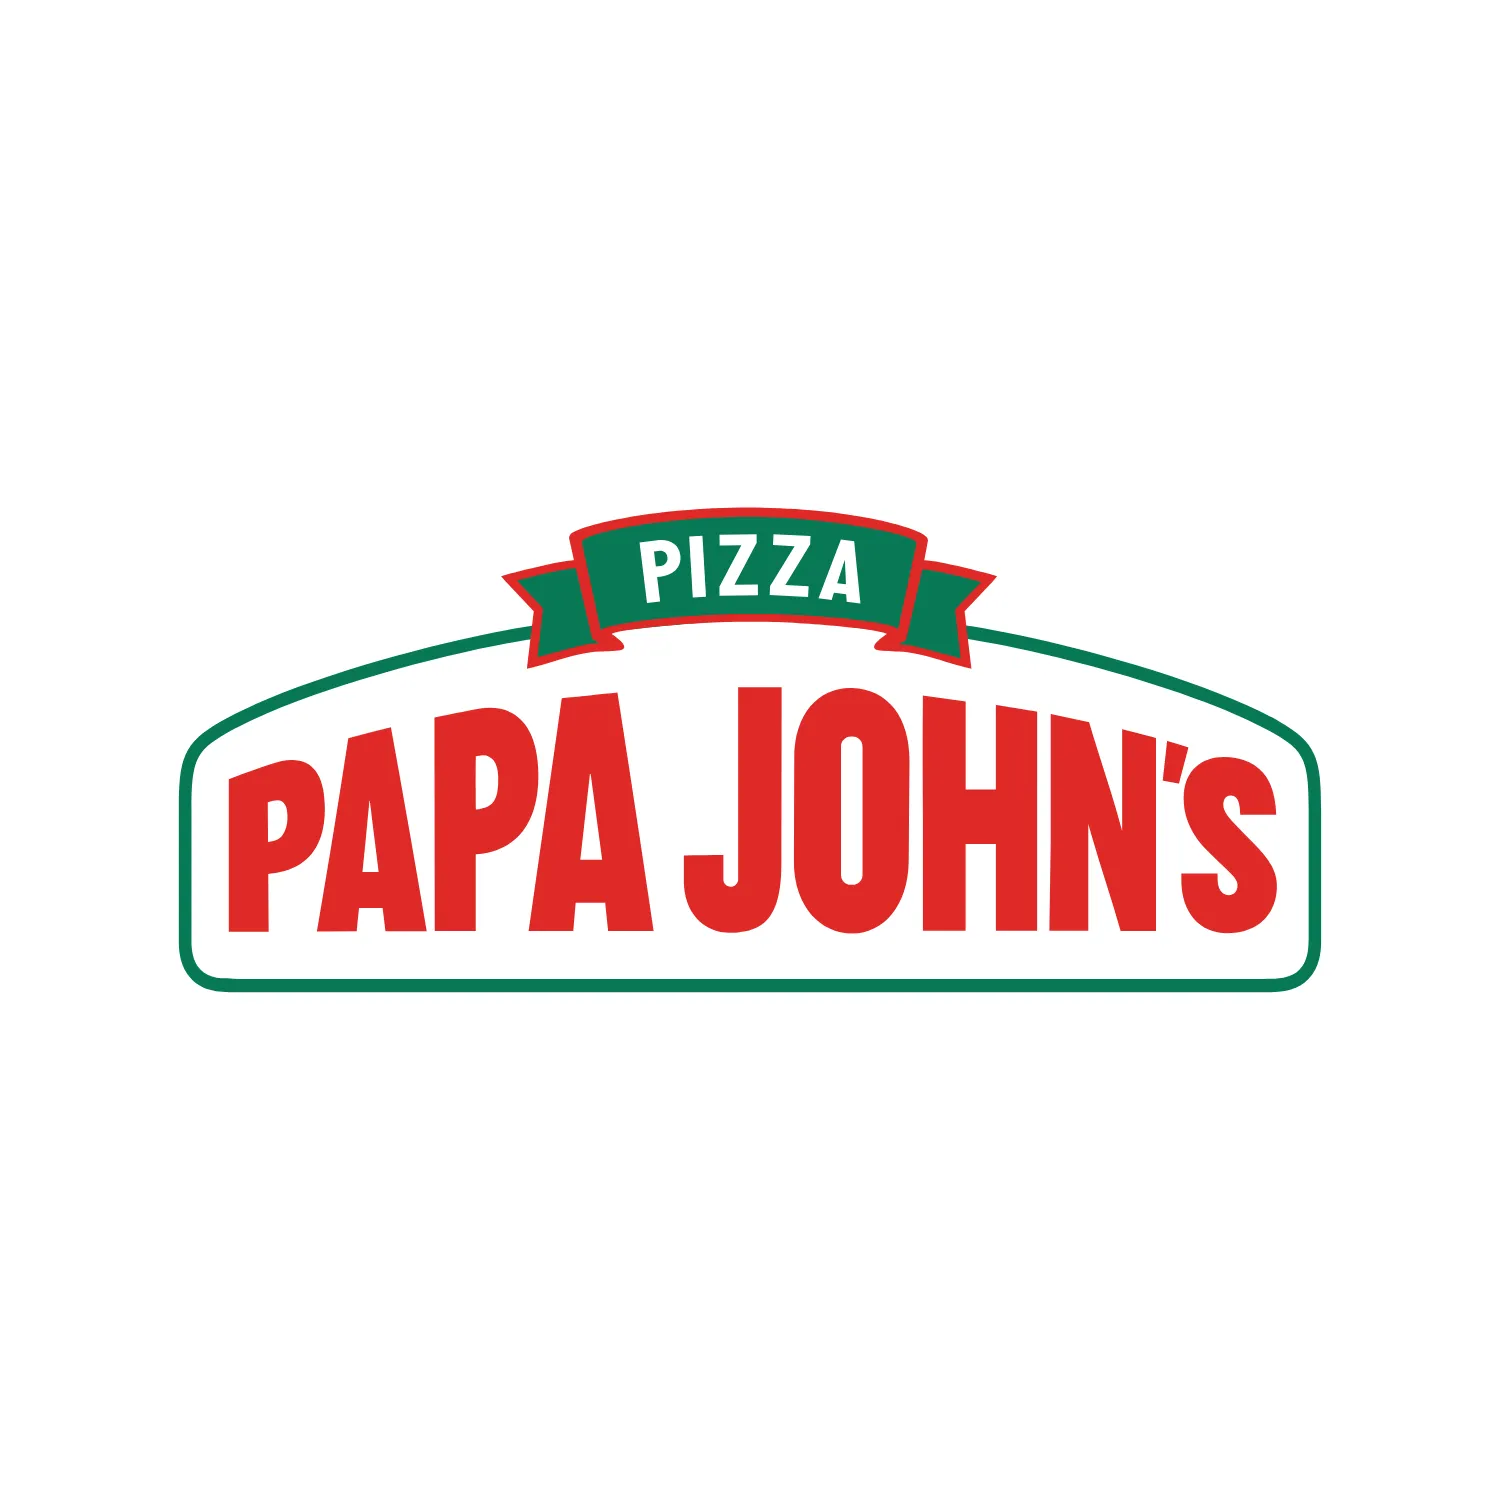 Database of Papa John’s Pizza Locations in the United States